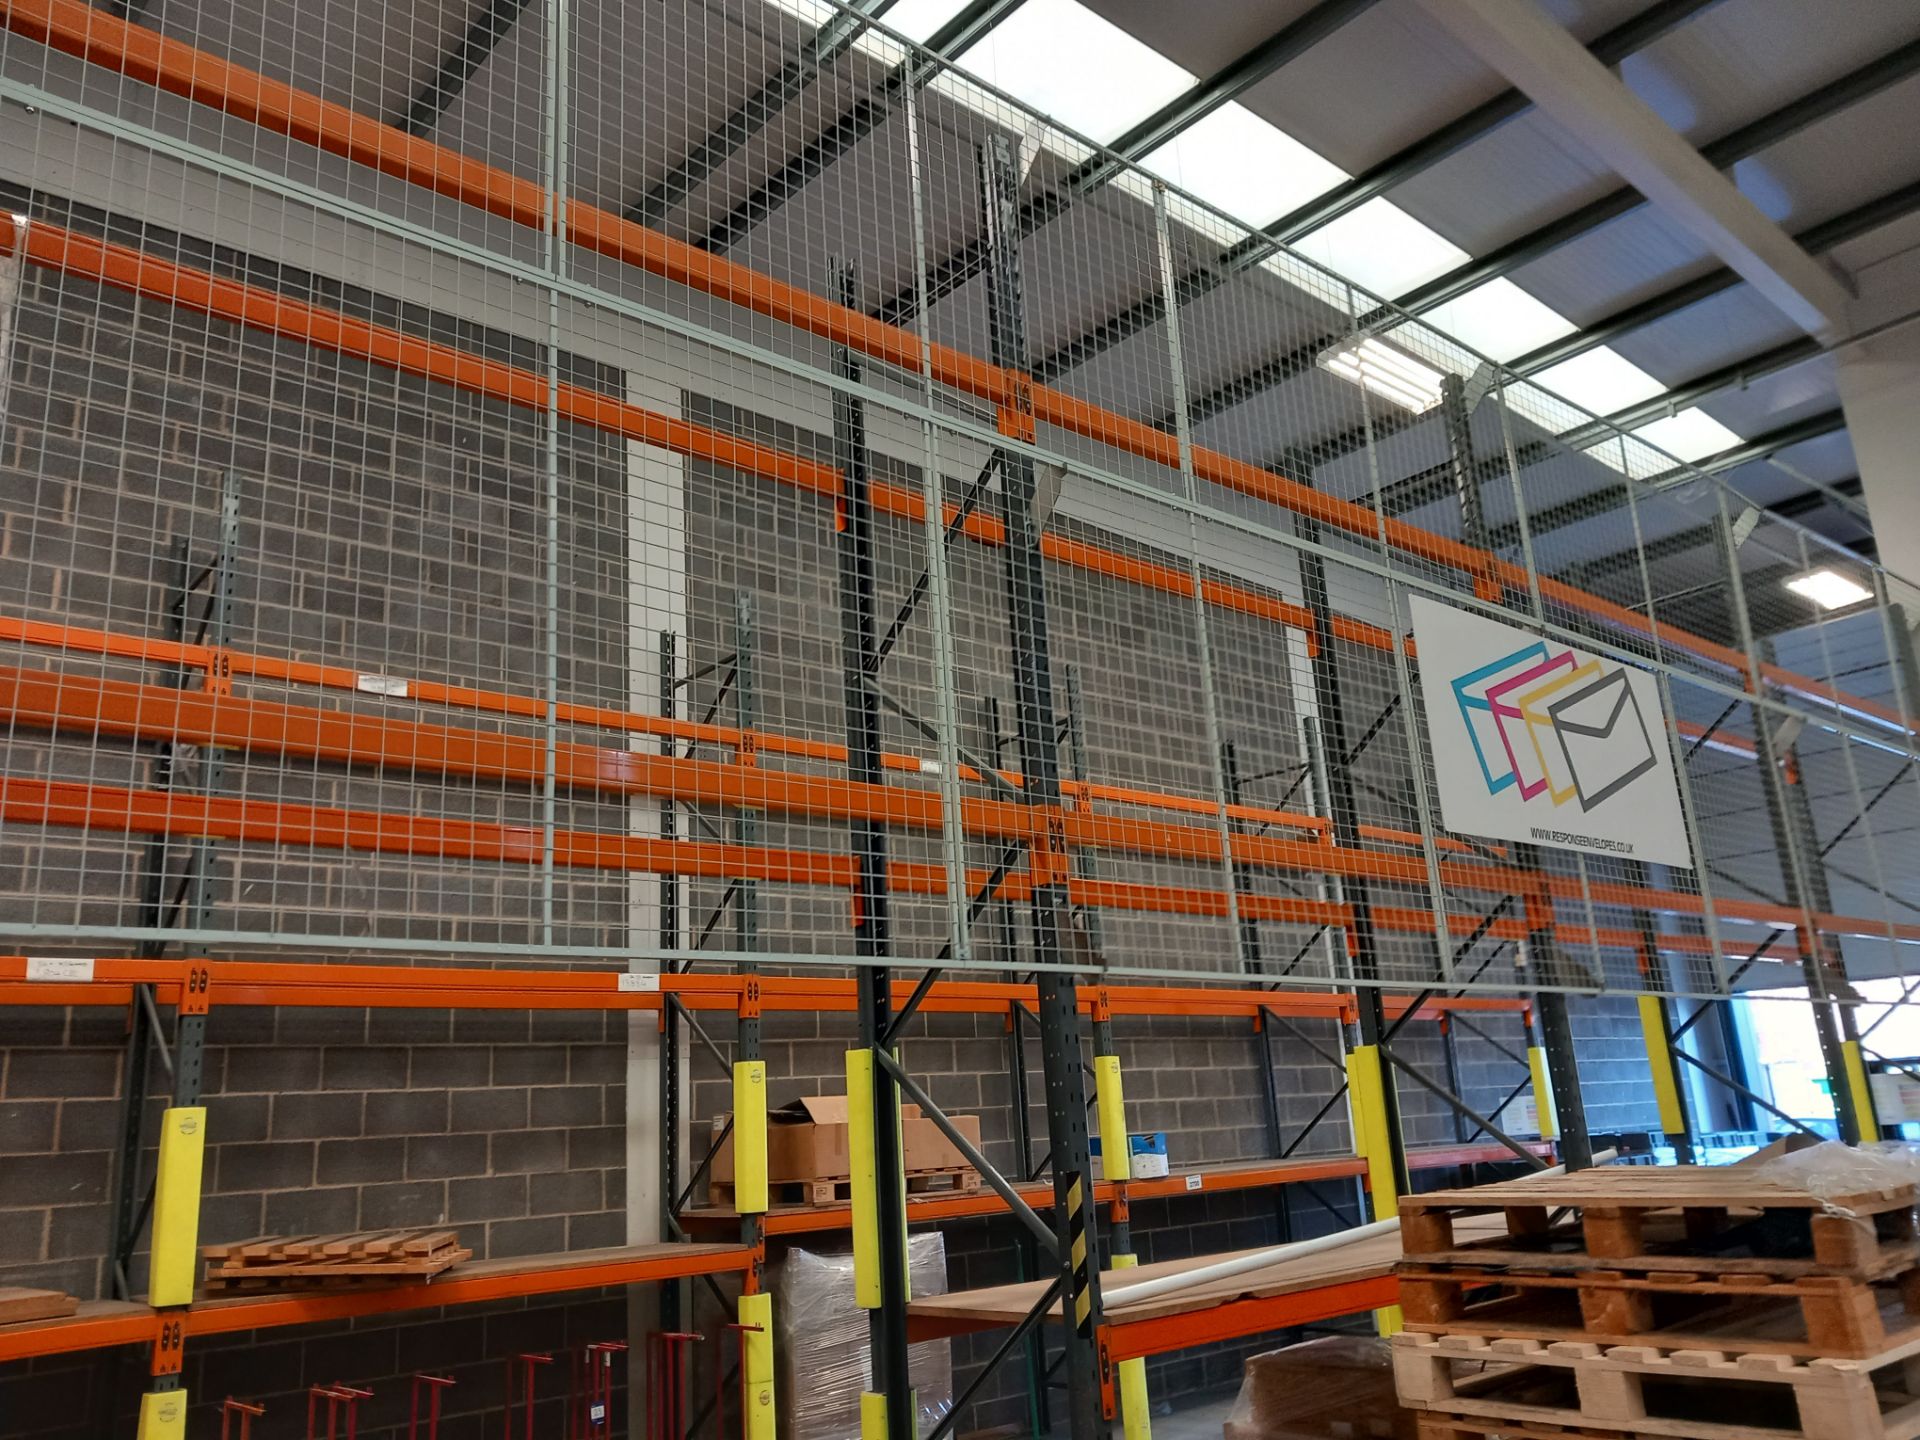 16 Bays of Dexion Speedlock boltless steel pallet racking with spare beams & guard railing & shelf - Image 6 of 9